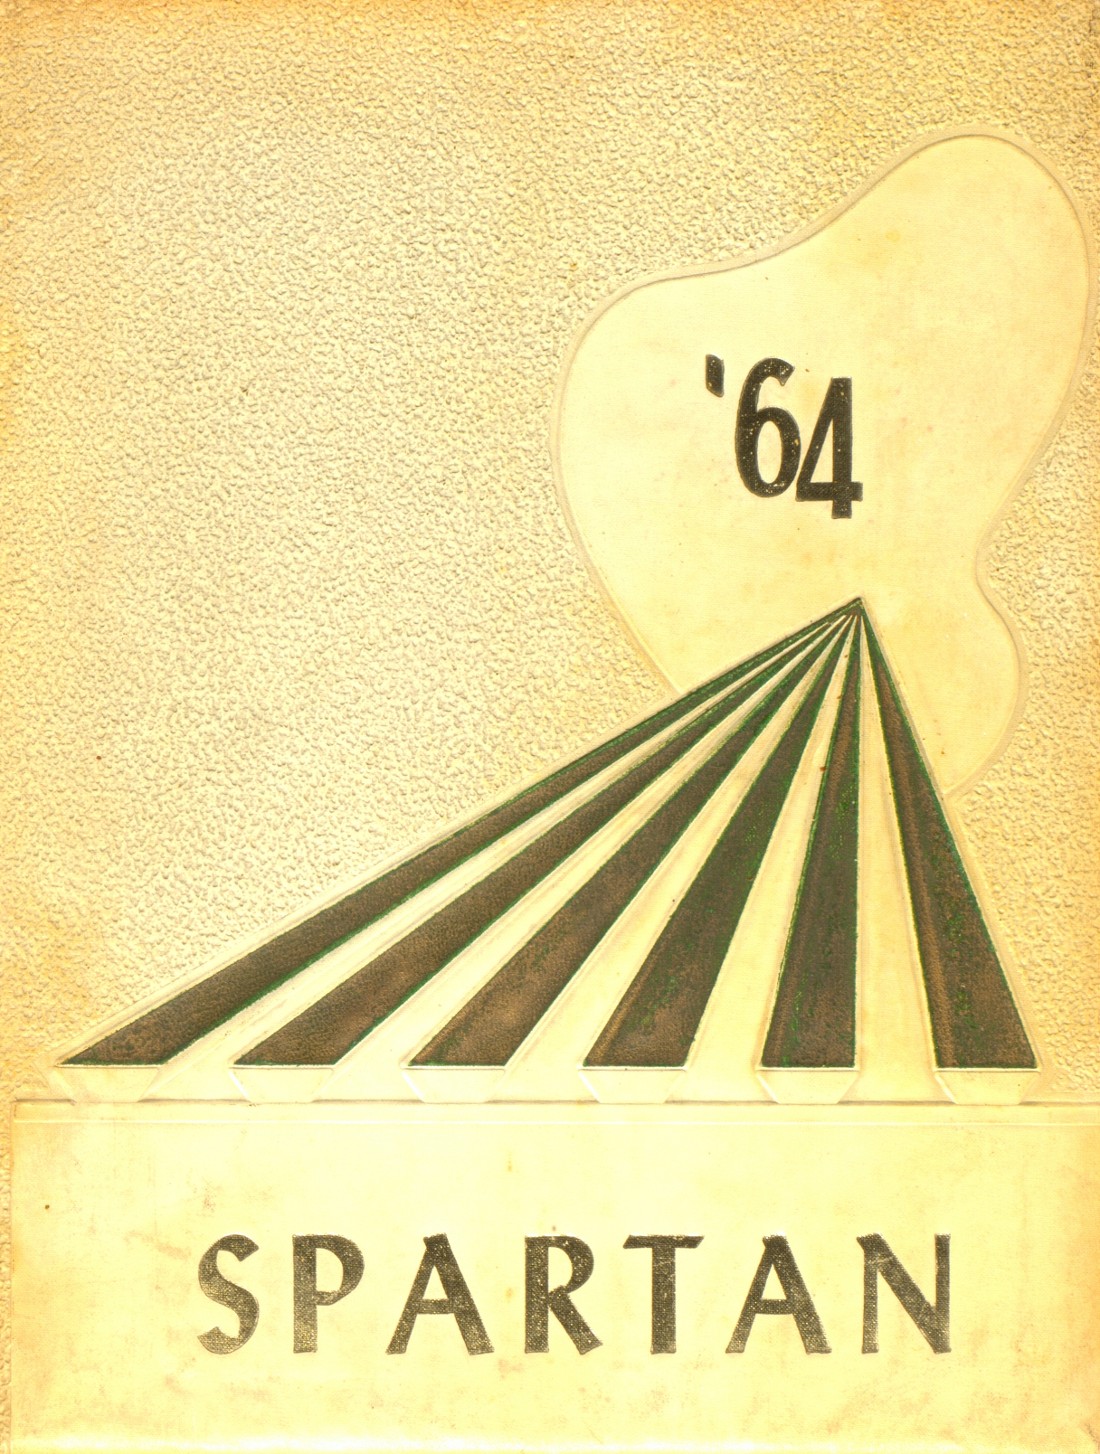 1964 yearbook from Spearfish High School from Spearfish, South Dakota